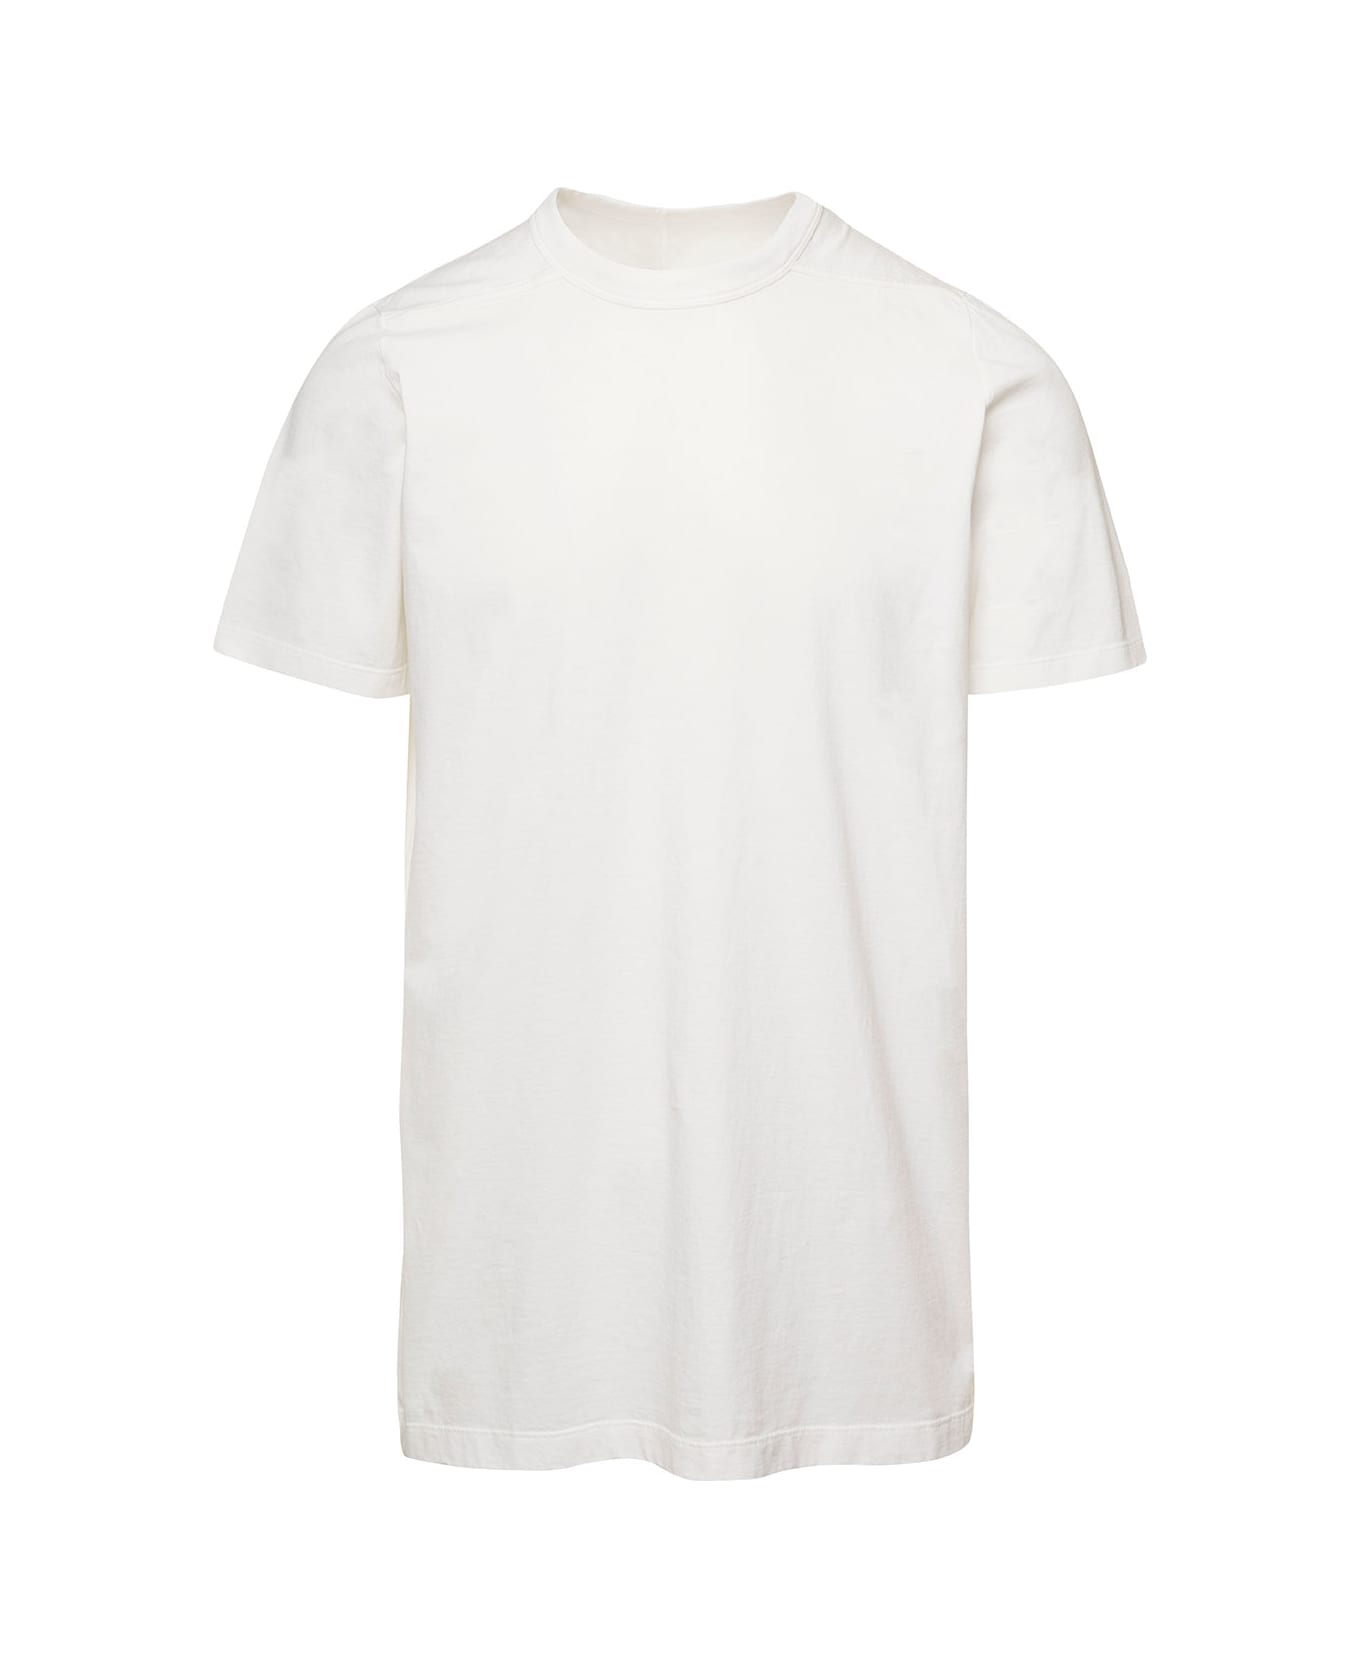 Rick Owens White Level T T-shirt With Vertical Seams On The Back In Cotton Man - White